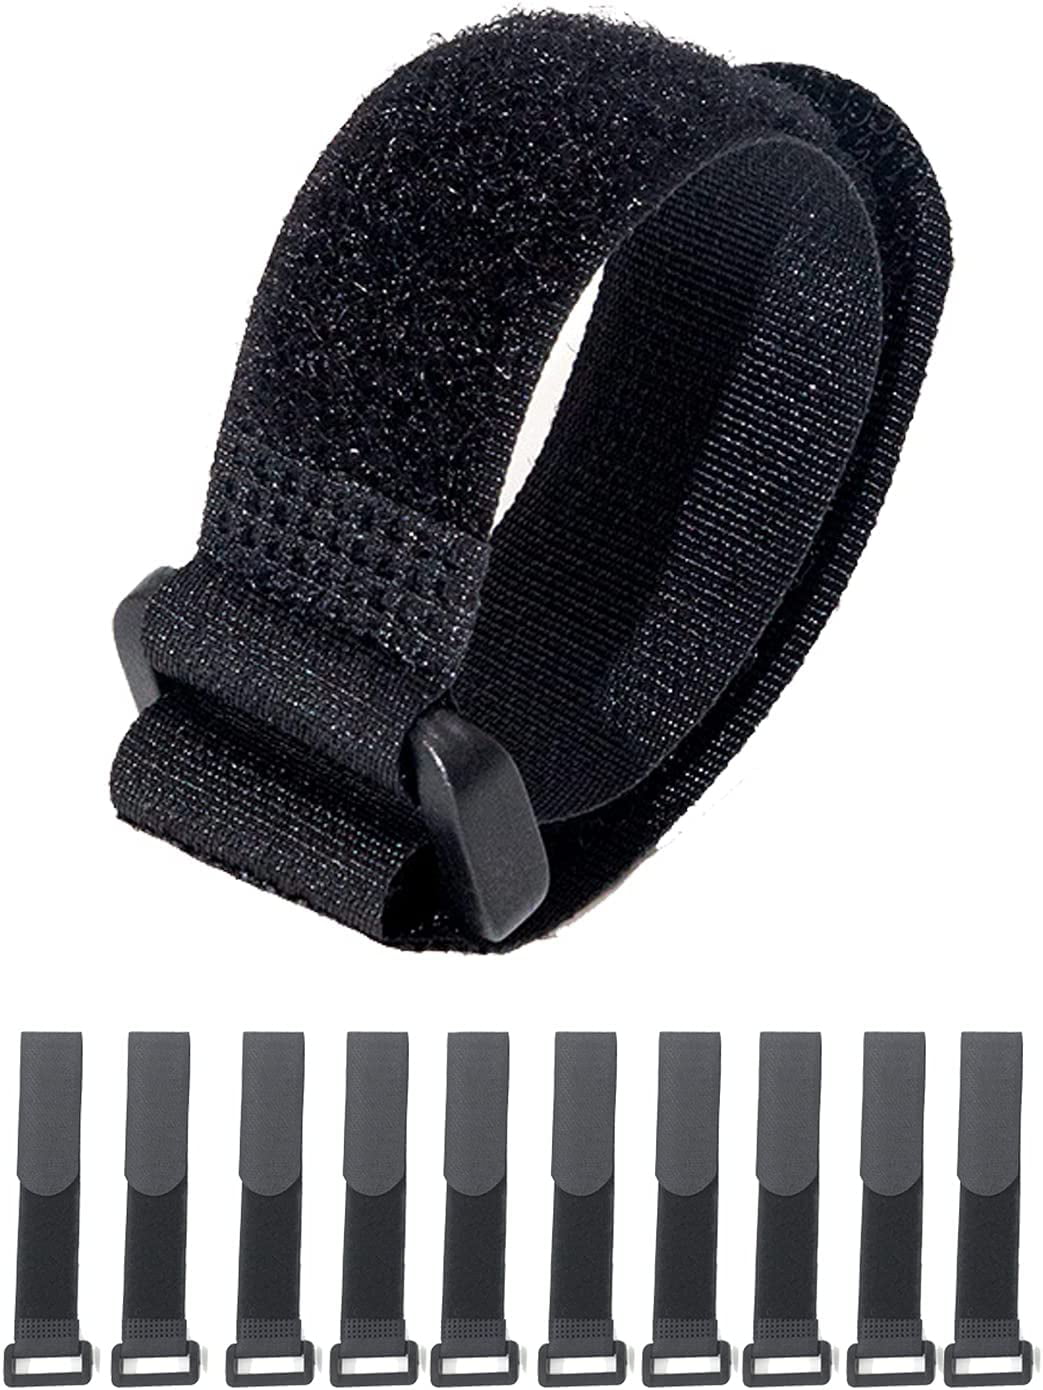 Velcro Adjustable Reusable All-Purpose Nylon Straps with Buckle